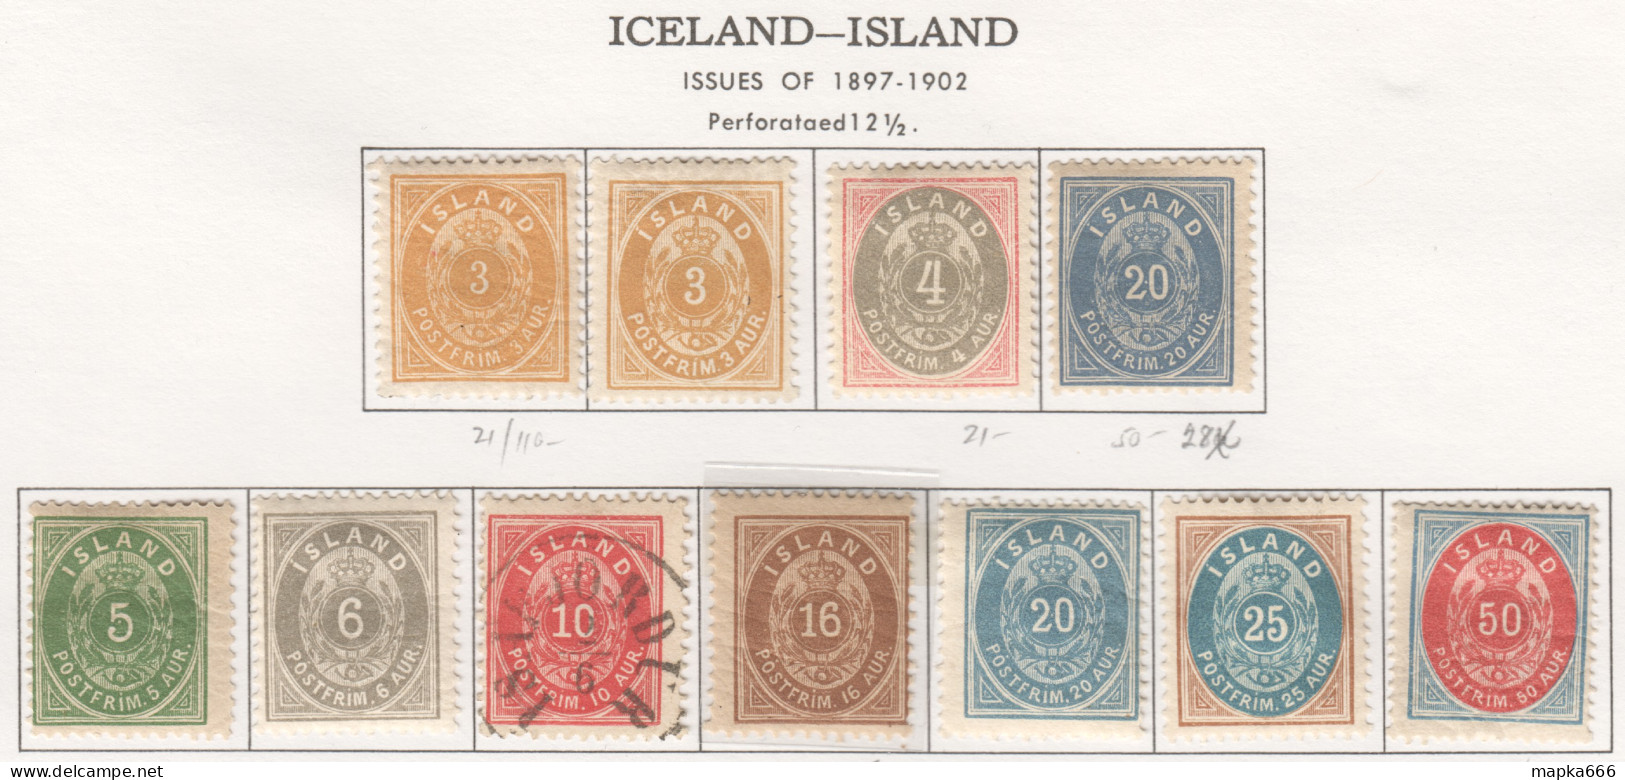 Sp612 1882-1901 Iceland Crown Inscribed 'Postfrim' 14X12.5 Michel #7-9B,12-14Ba,16A,16A,20-22 384 Euro 10St Lh, 1St Used - Unused Stamps